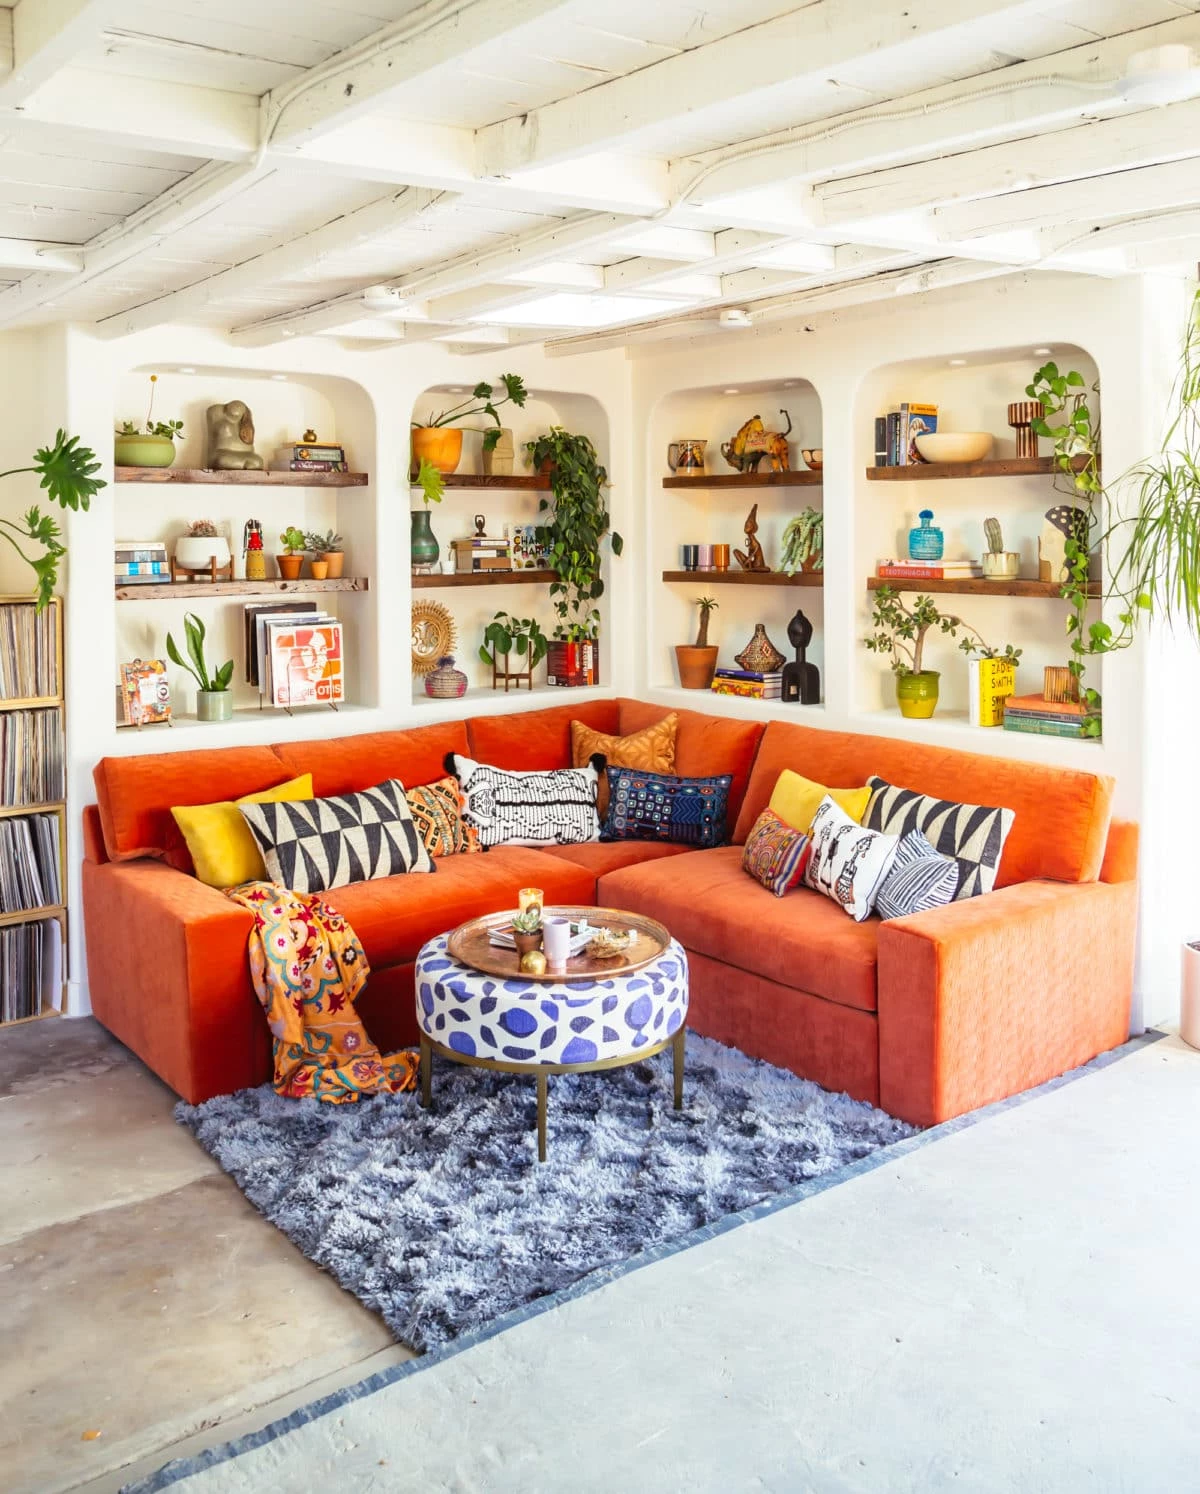 A bright burnt orange sofa with a blue fuzzy rug and bohemian patterns in pillows and a unique coffee table with blue spots. Living room has built in shelves that have lots of books, plants, pictures, and knick knacks displayed.